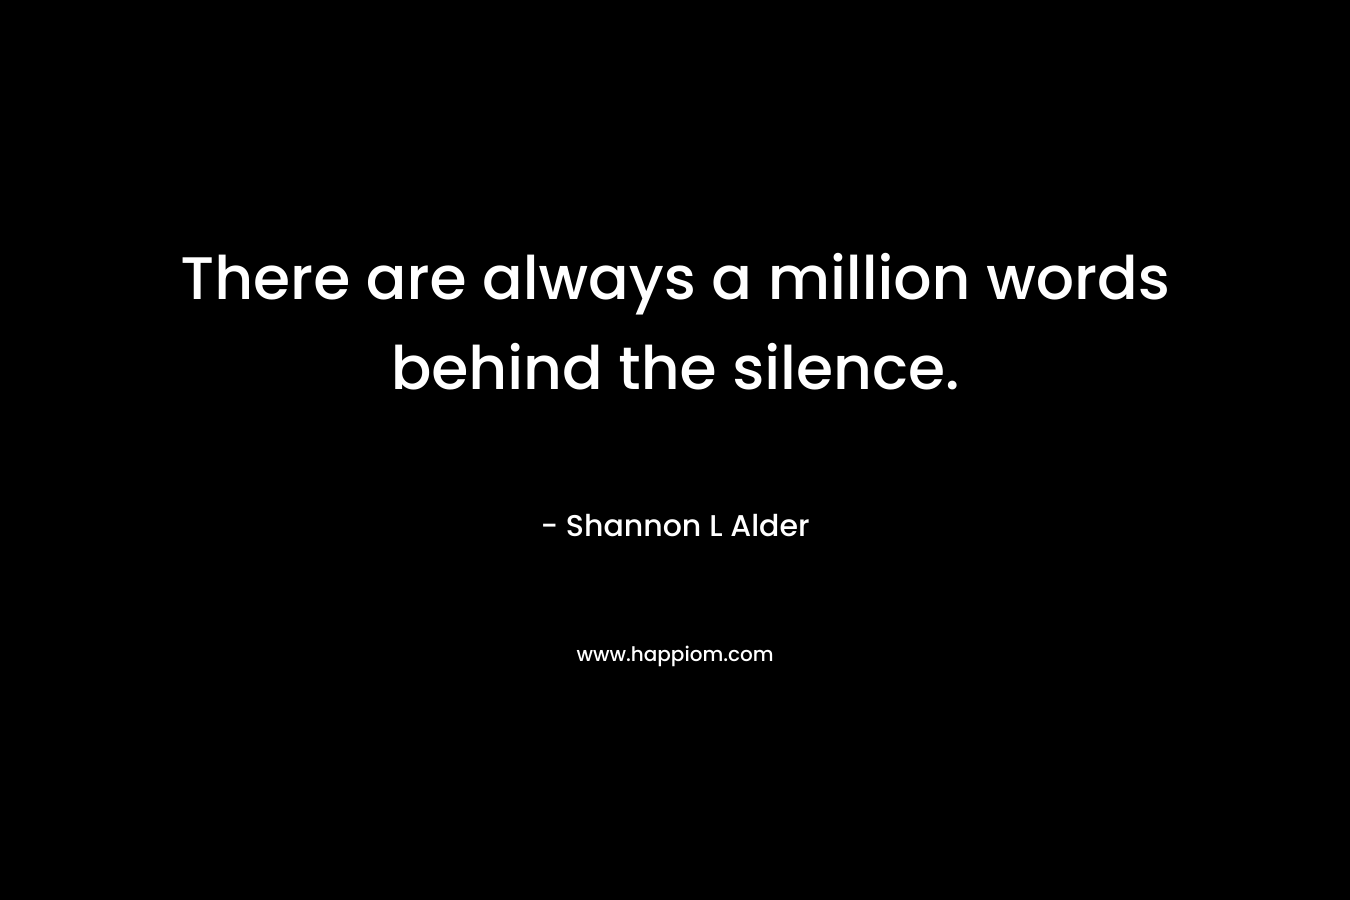 There are always a million words behind the silence.